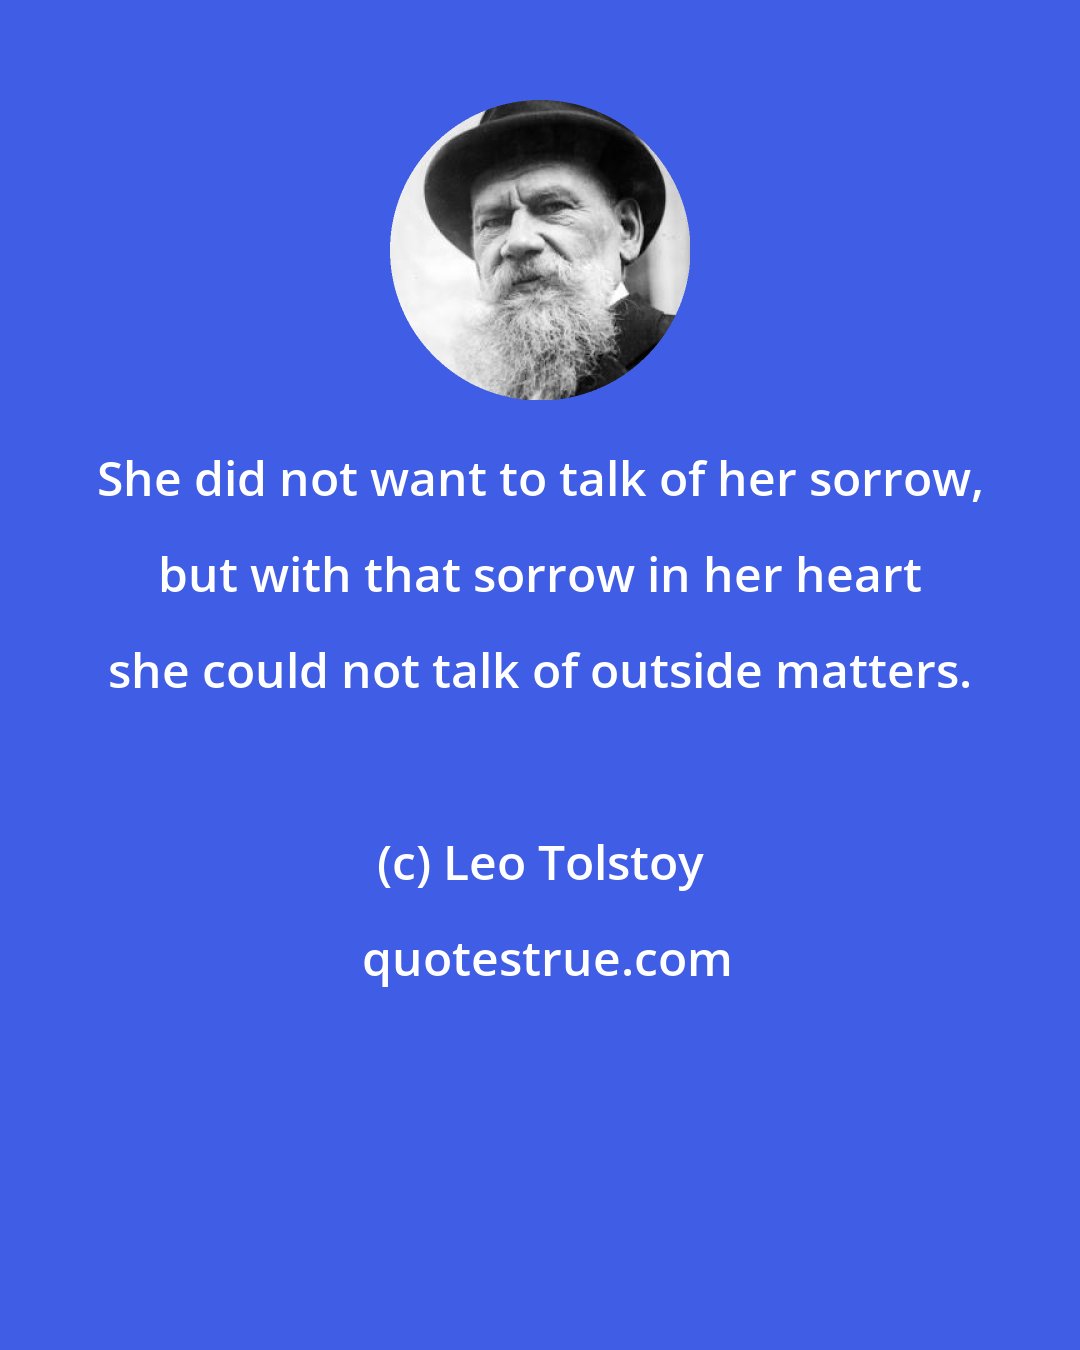 Leo Tolstoy: She did not want to talk of her sorrow, but with that sorrow in her heart she could not talk of outside matters.